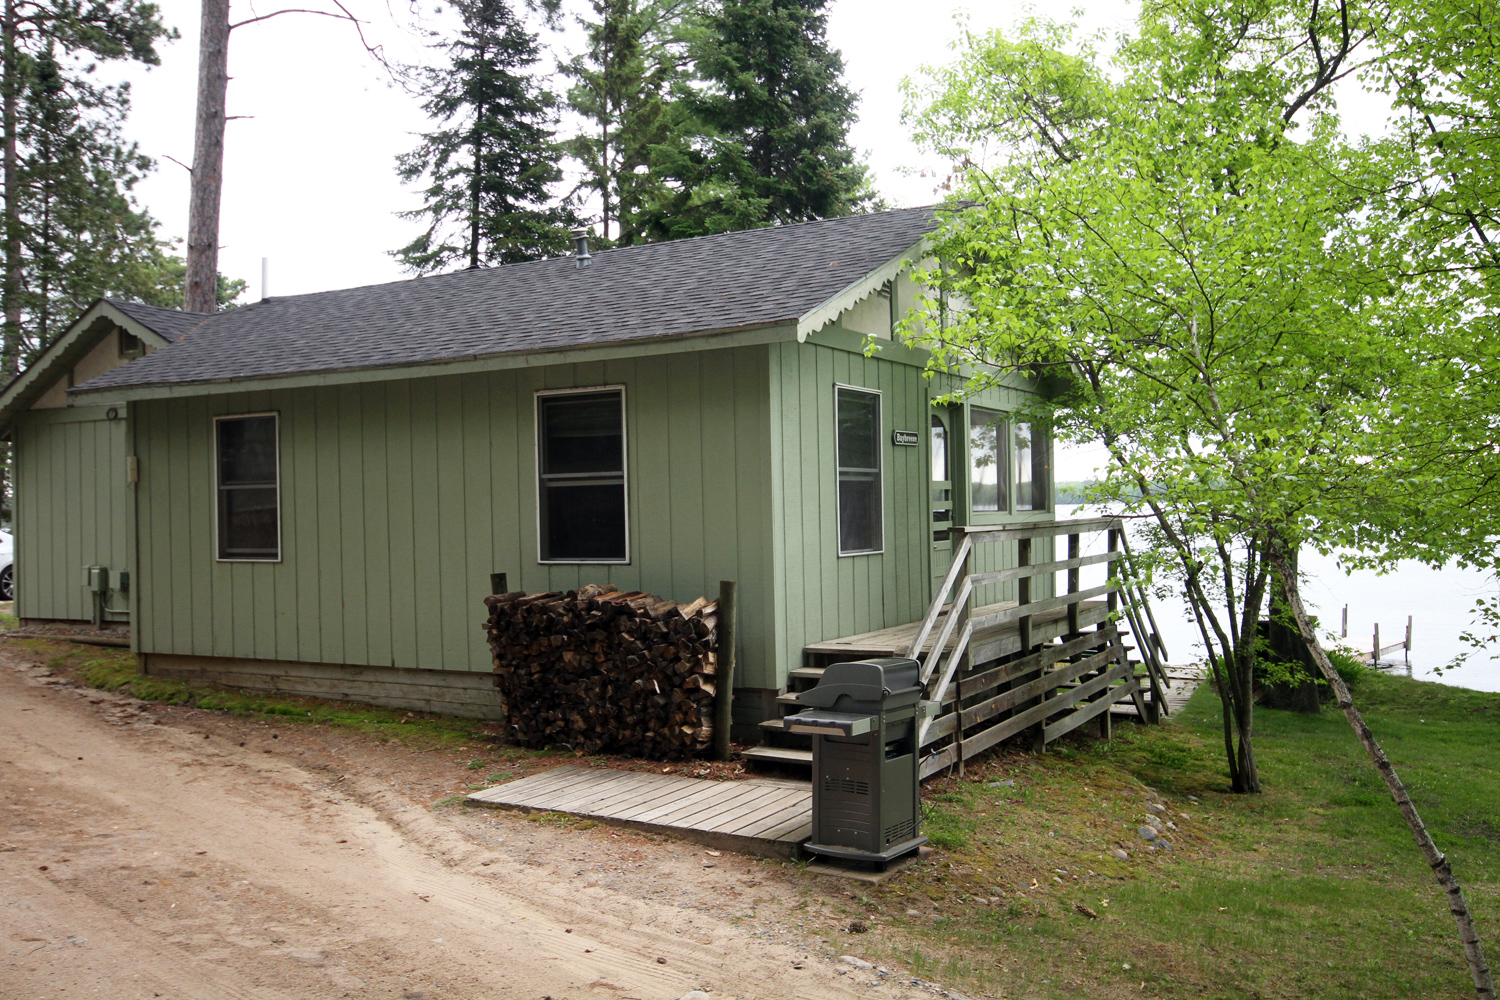 Baybreeze - Three Bedroom Lakeside Cabin with your own dock and great views